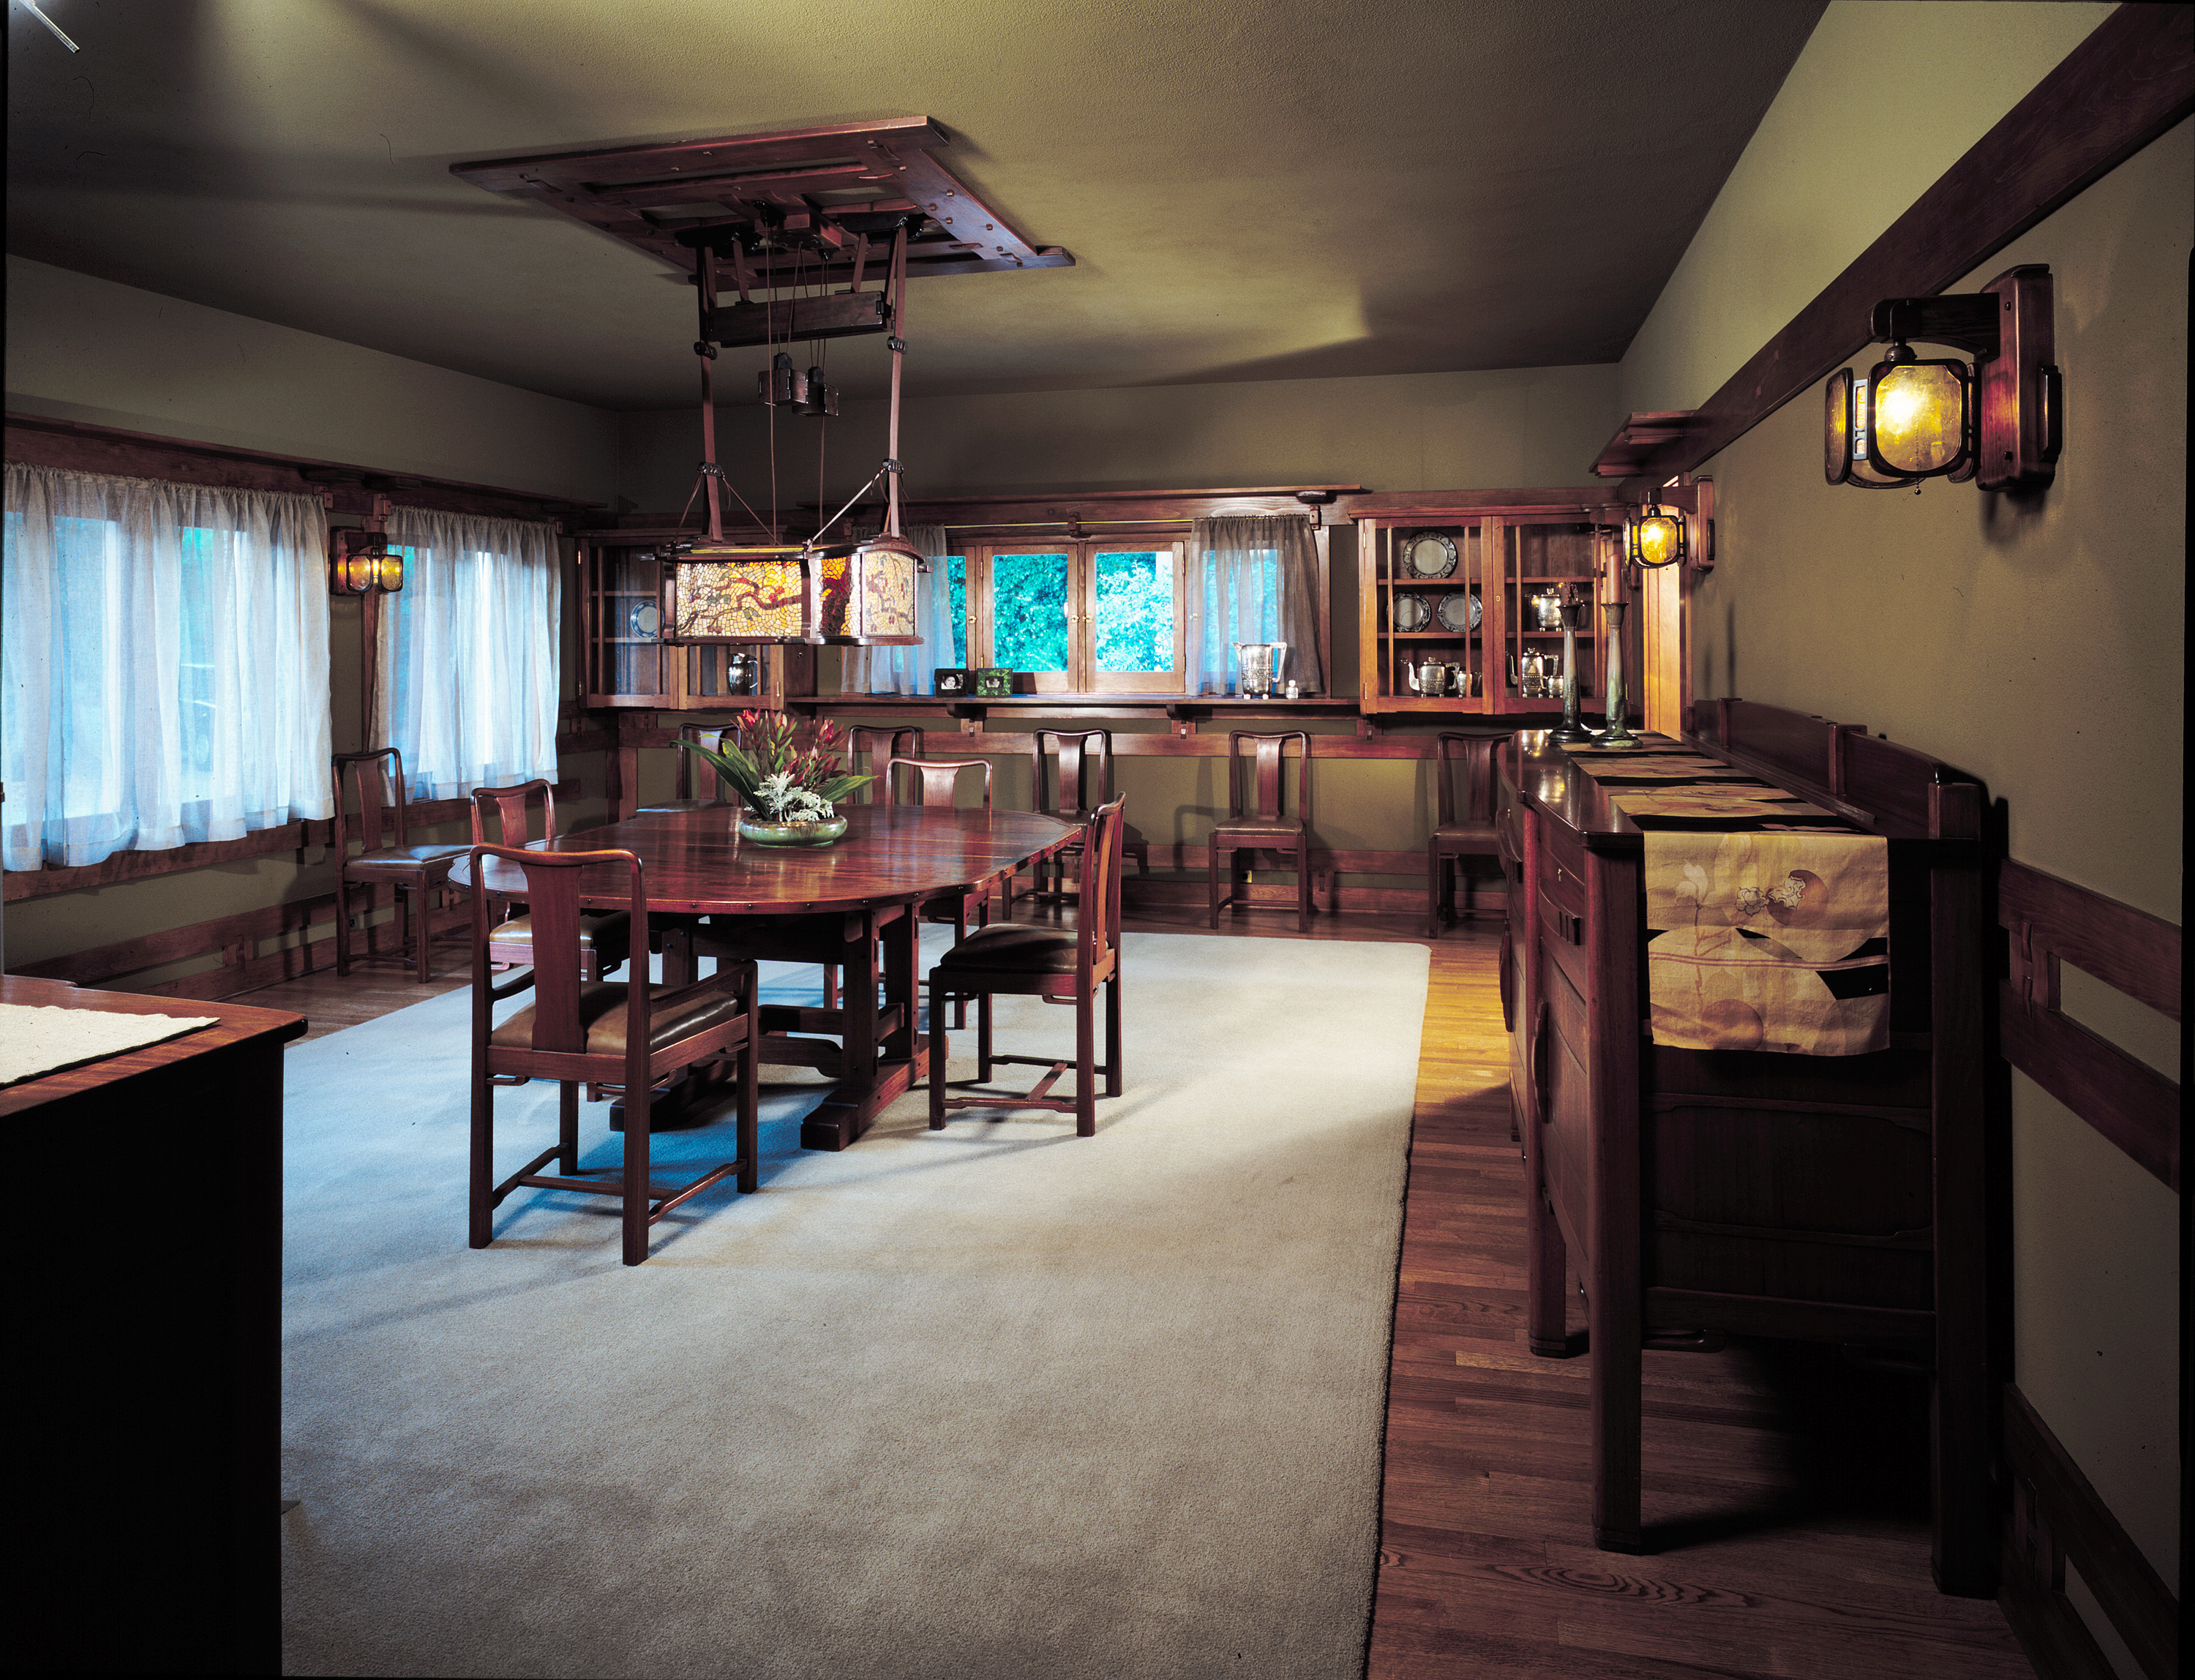 A dining room in a craftsman-style home, with taupe-colored walls and wood furniture.